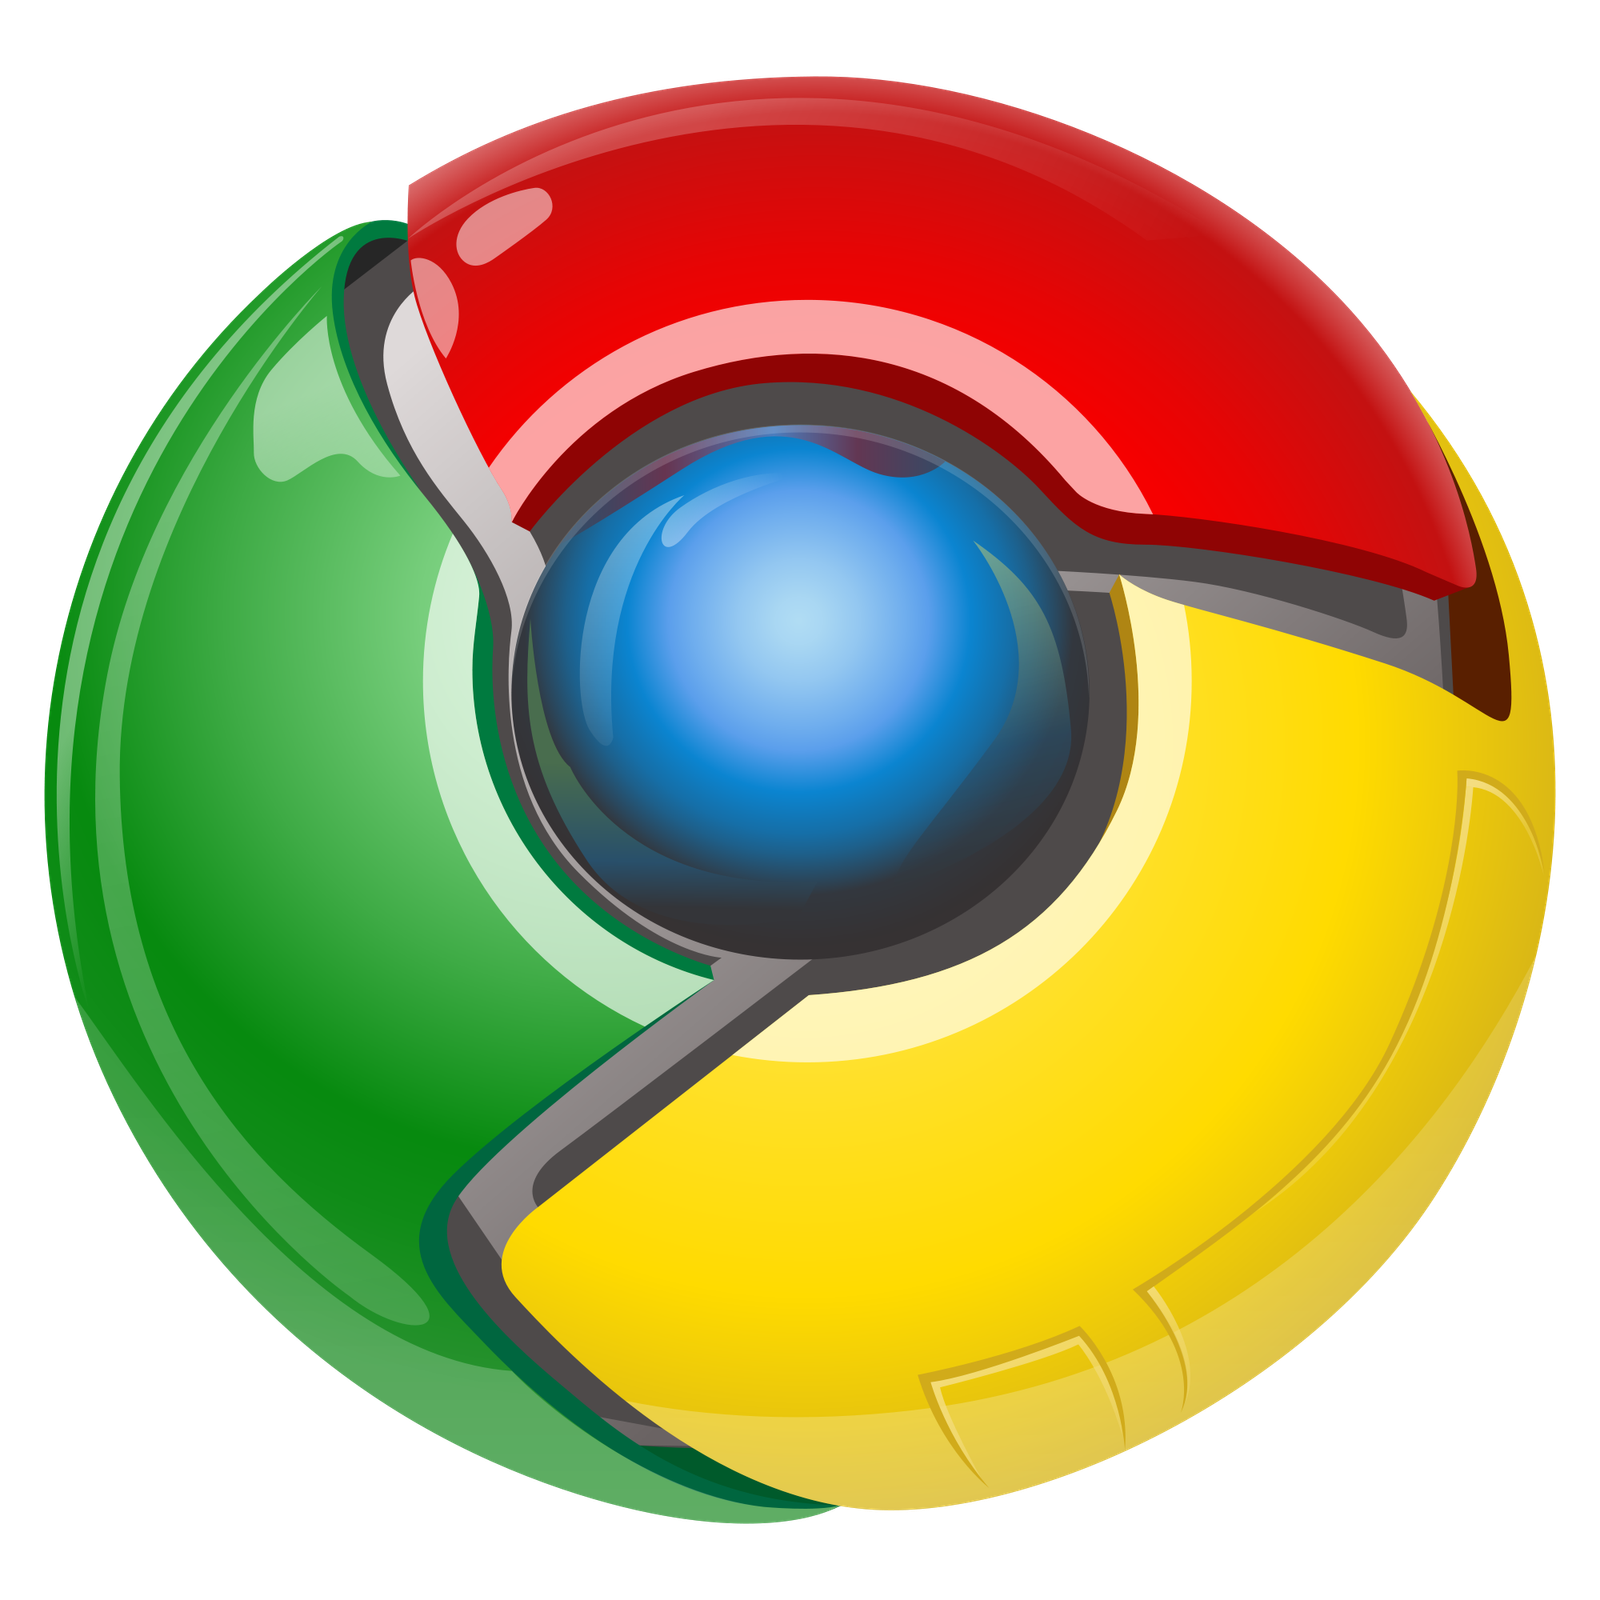 How to setup Themes in Google Chromebook